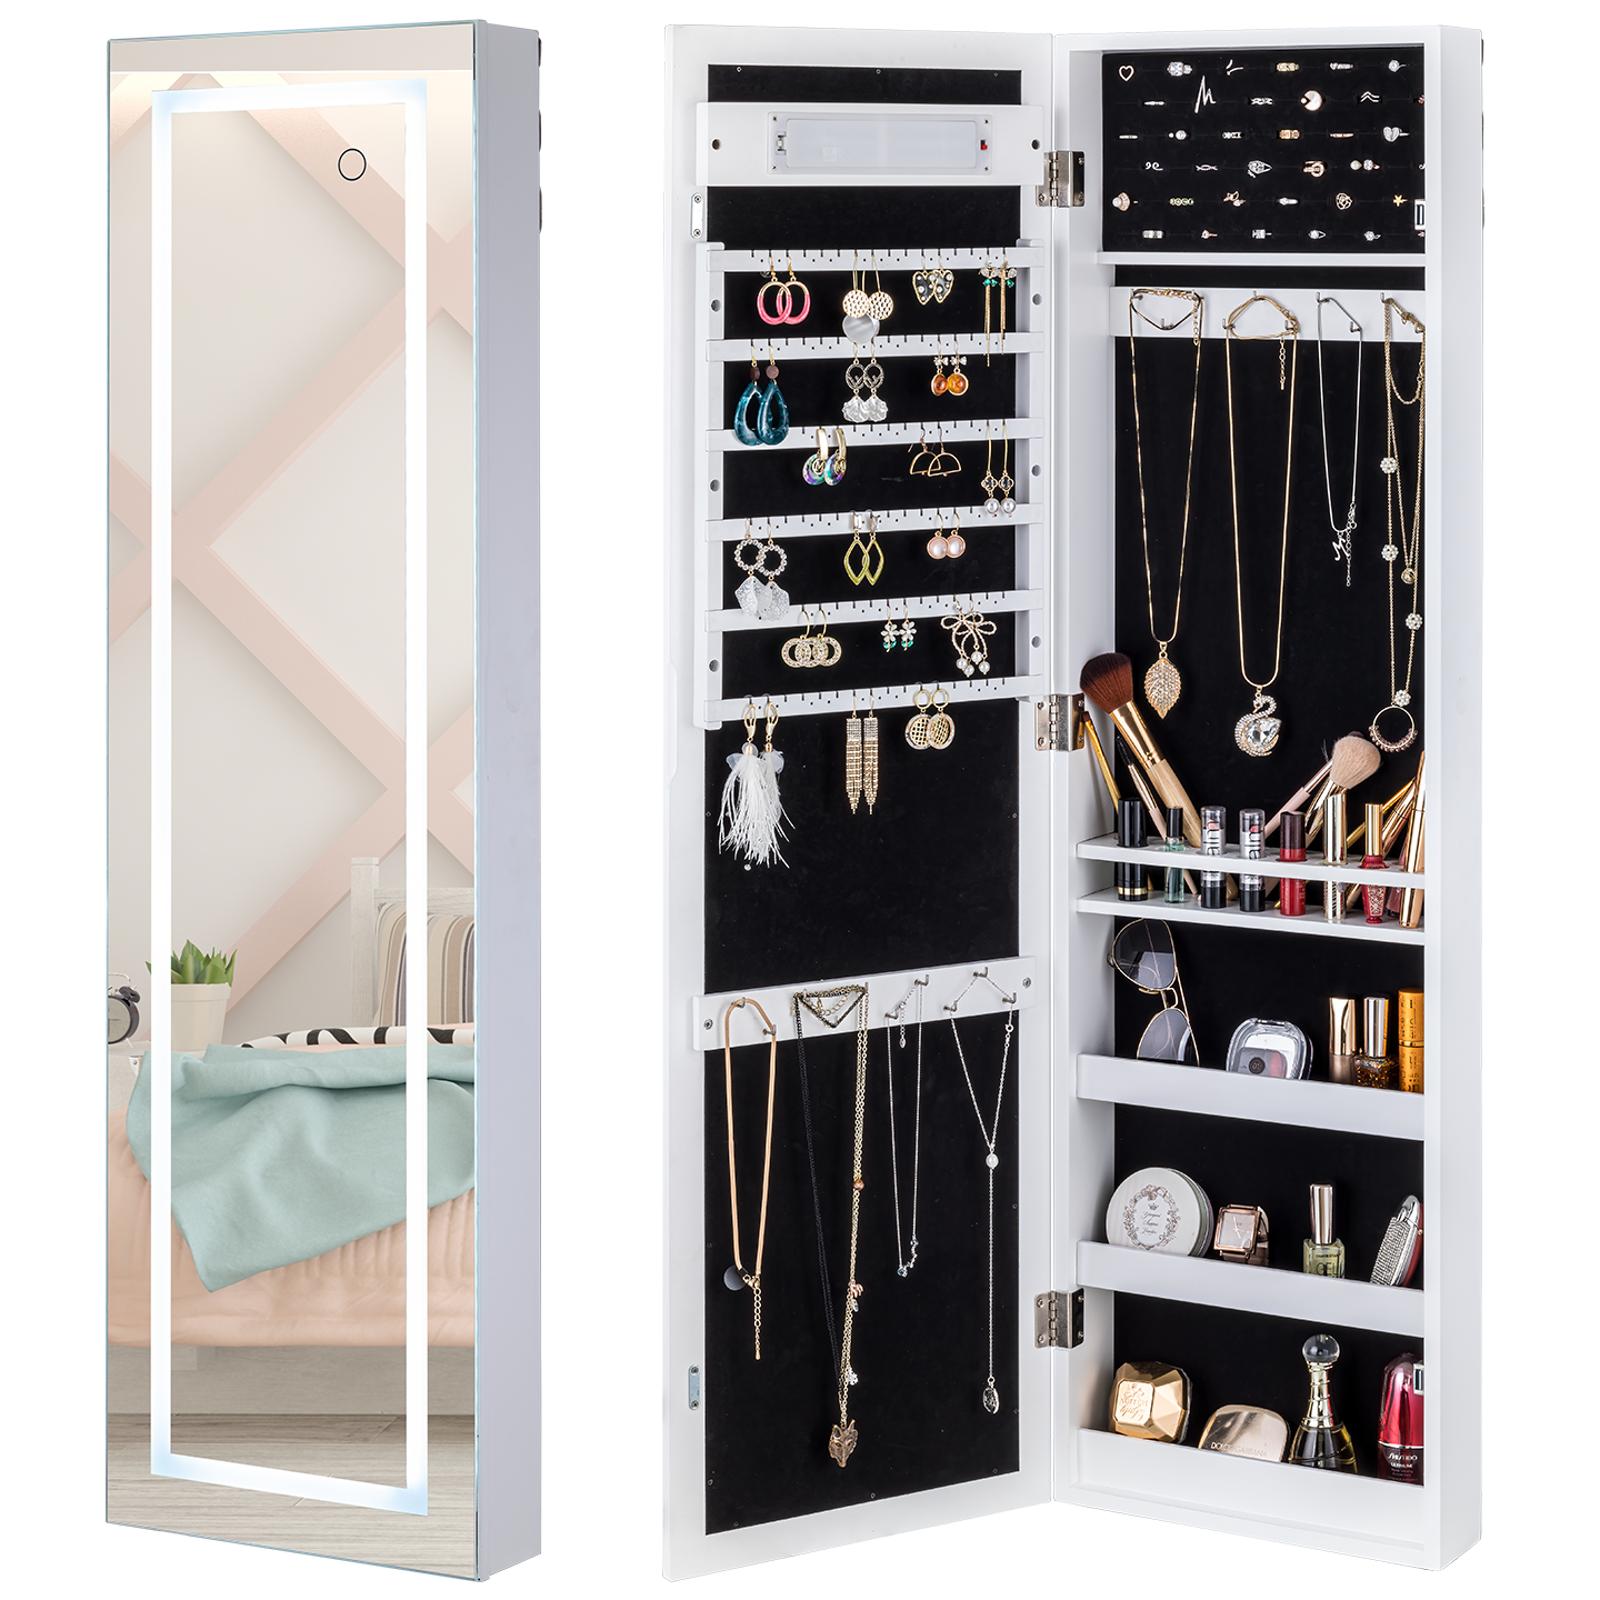 ViscoLogic Hermione Wall Mounted/ Door- Hanging LED Jewelry Armoire Makeup Storage Cabinet for Cosmetics, Jewelry, Lockable Cabinet and Organizer With Dressing Mirror (White)